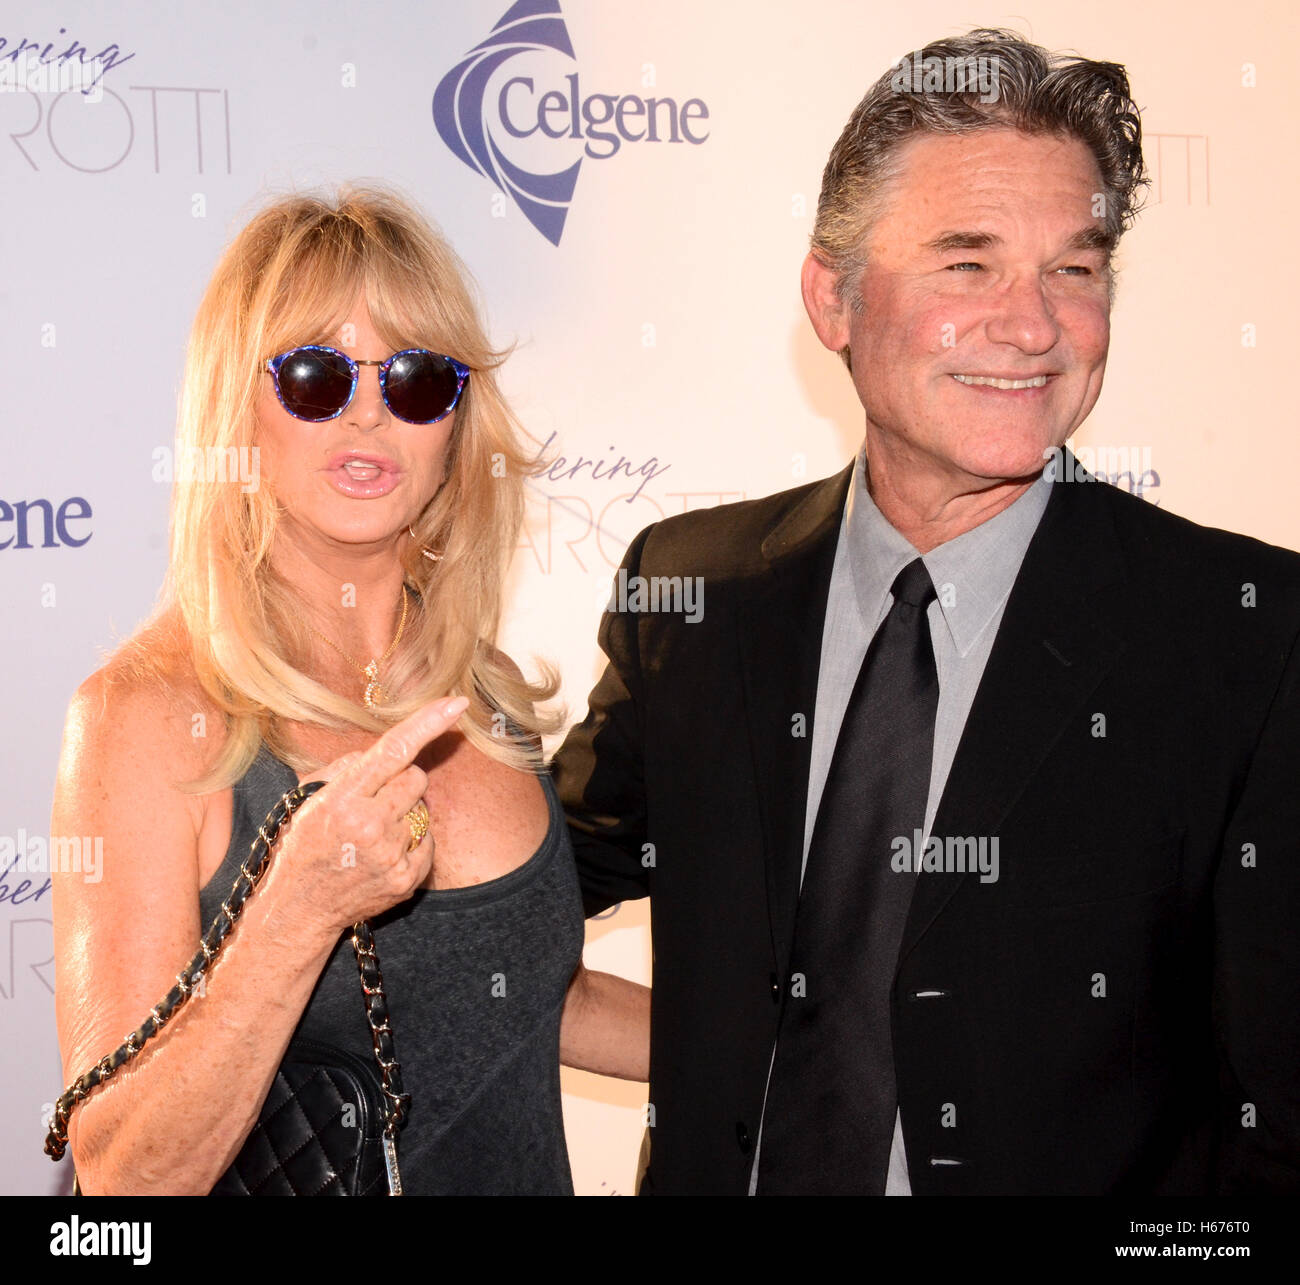 Goldie Hawn and Kurt Russell attends The Salk Institute Benefit Concert 'Remembering Pavarotti' featuring performances by Renée Fleming and Plácido Domingo at the Dorothy Chandler Pavilion on September 25th, 2015 in Los Angles CA. Stock Photo